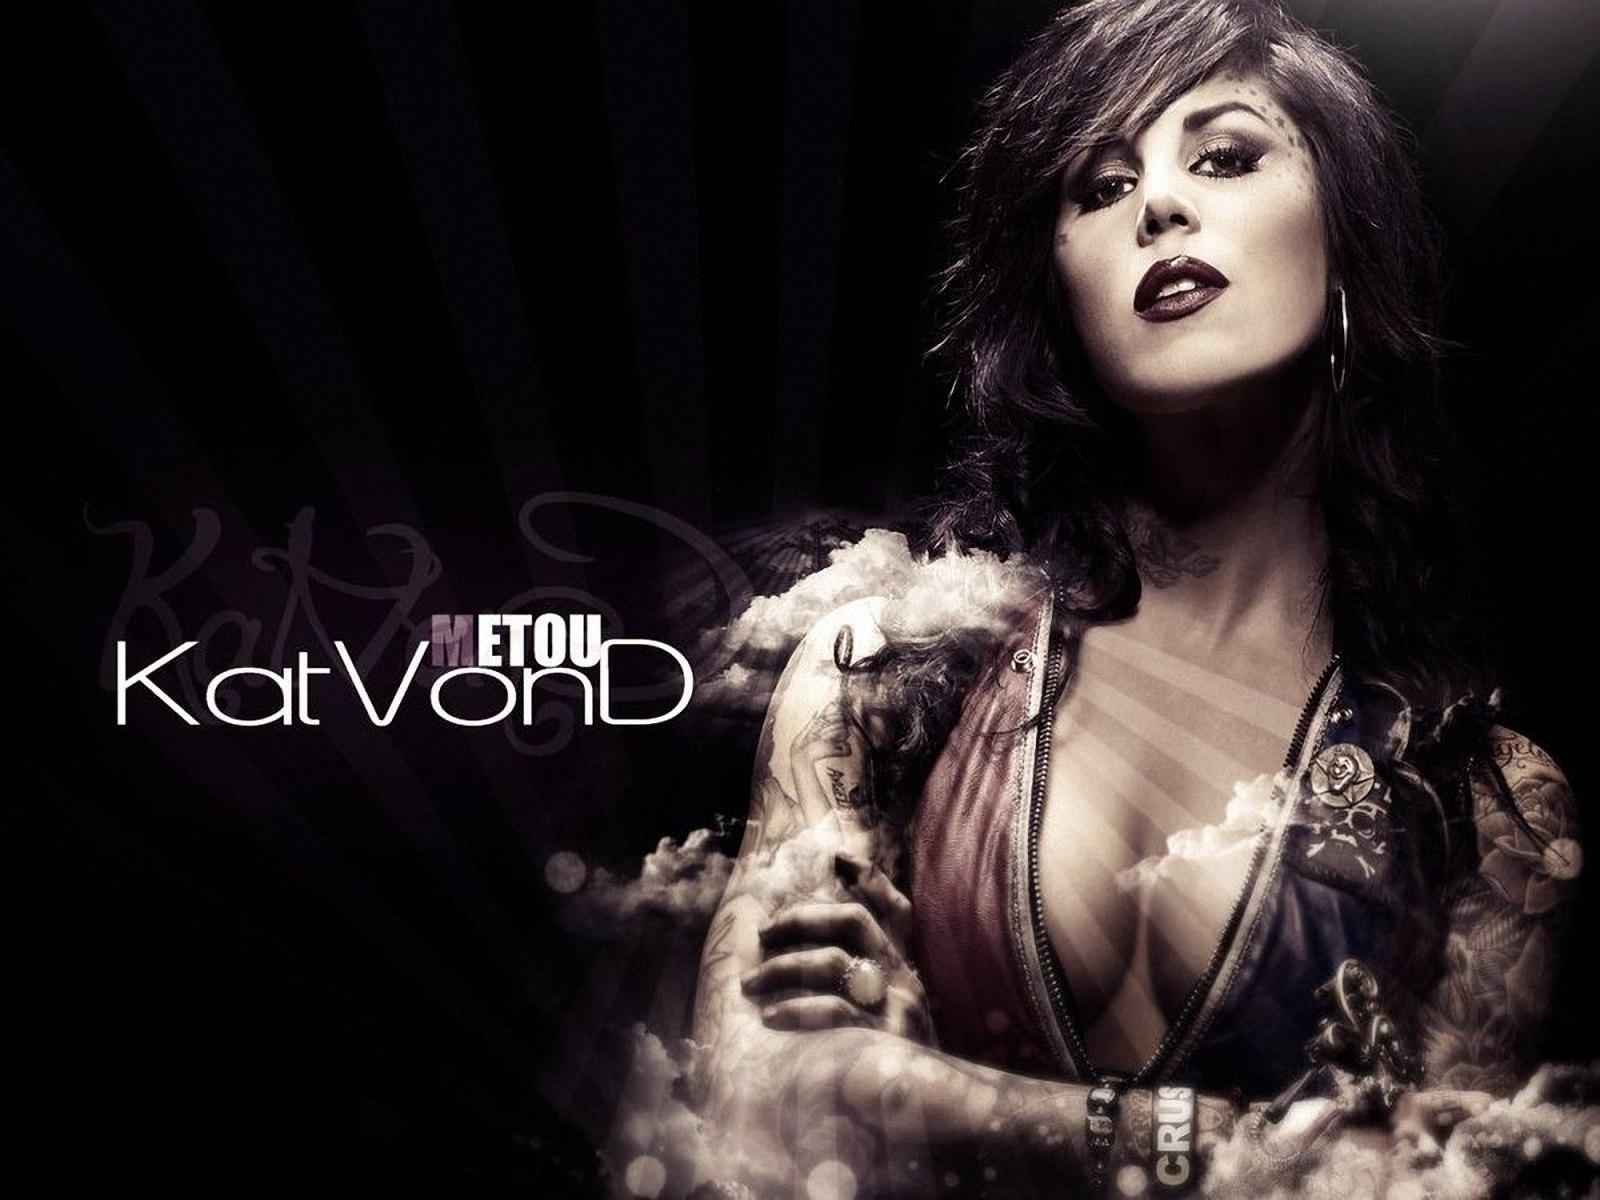 KAT VON D WALLPAPERS FREE Wallpapers Background images